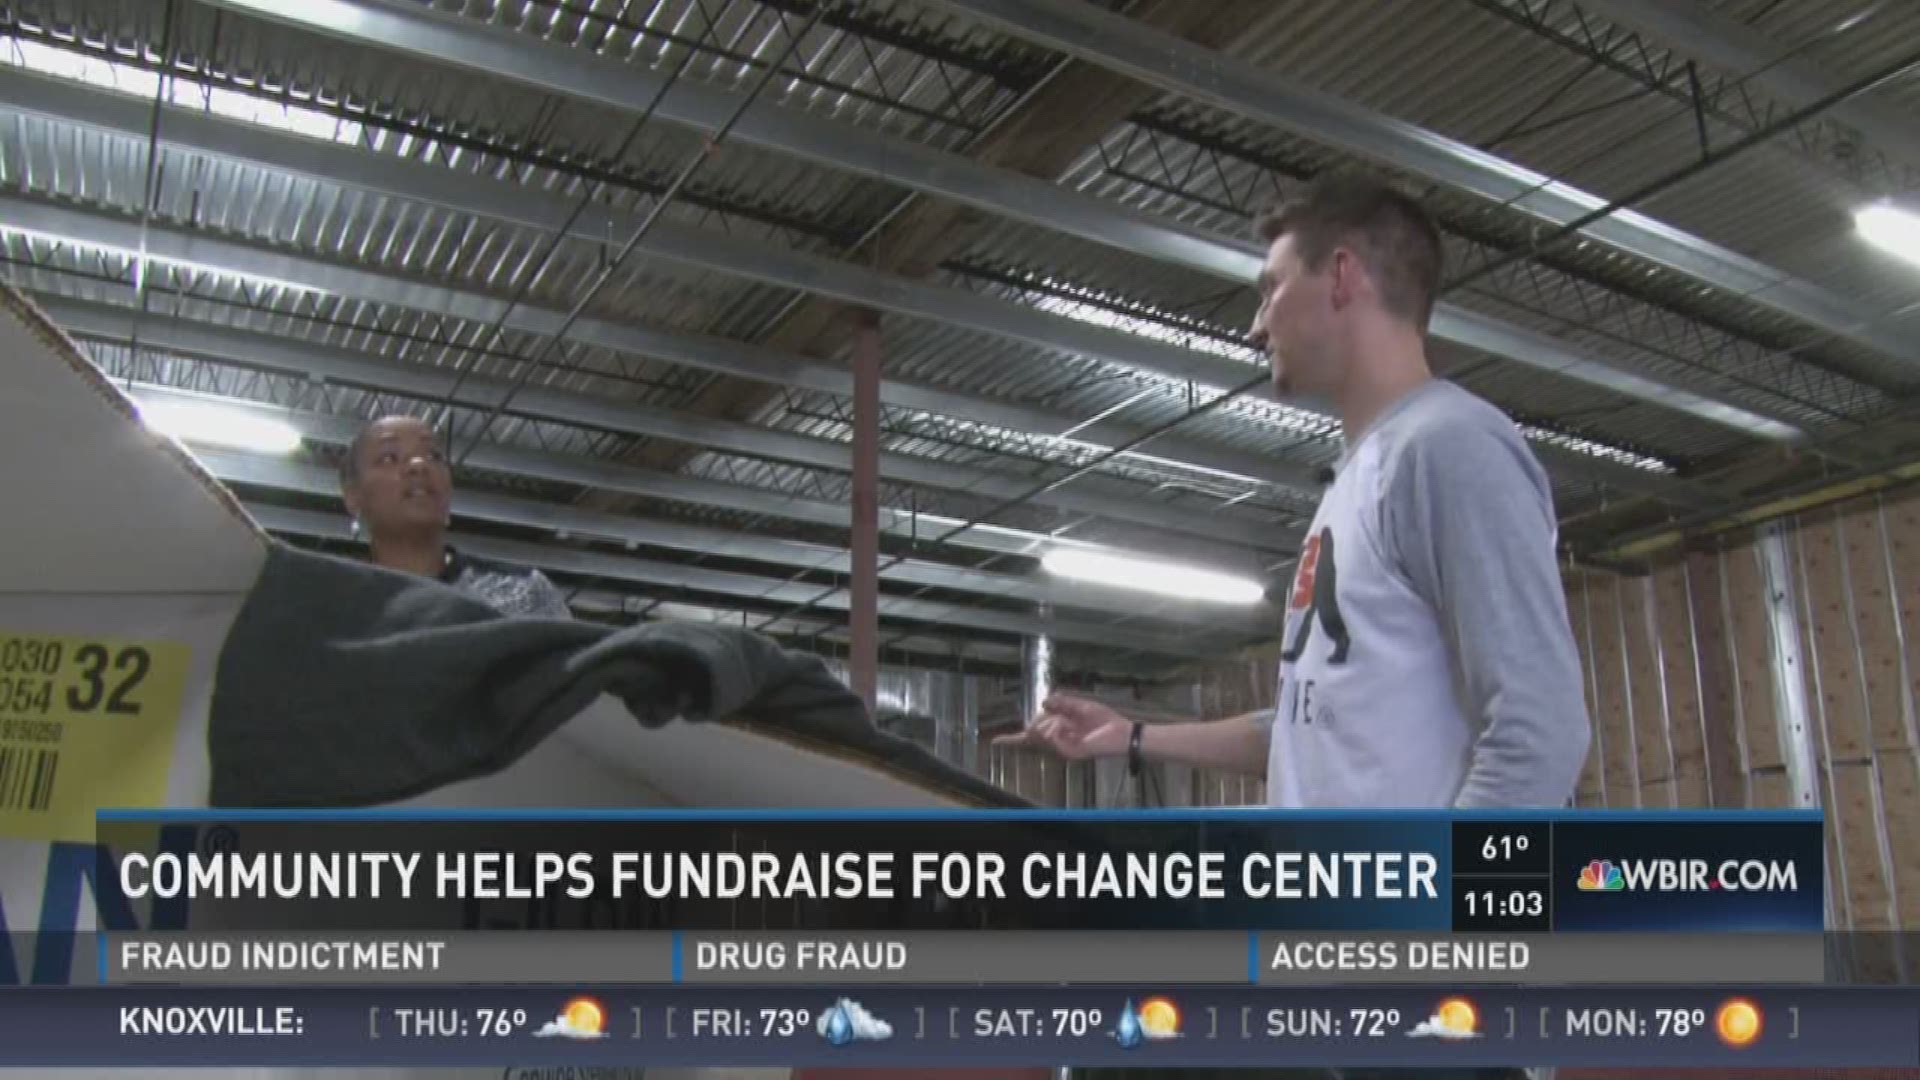 10News anchor Kendall Morris shows us  how East Tennesseans are pitching in to help the Change Center become a reality. (5/18/16)